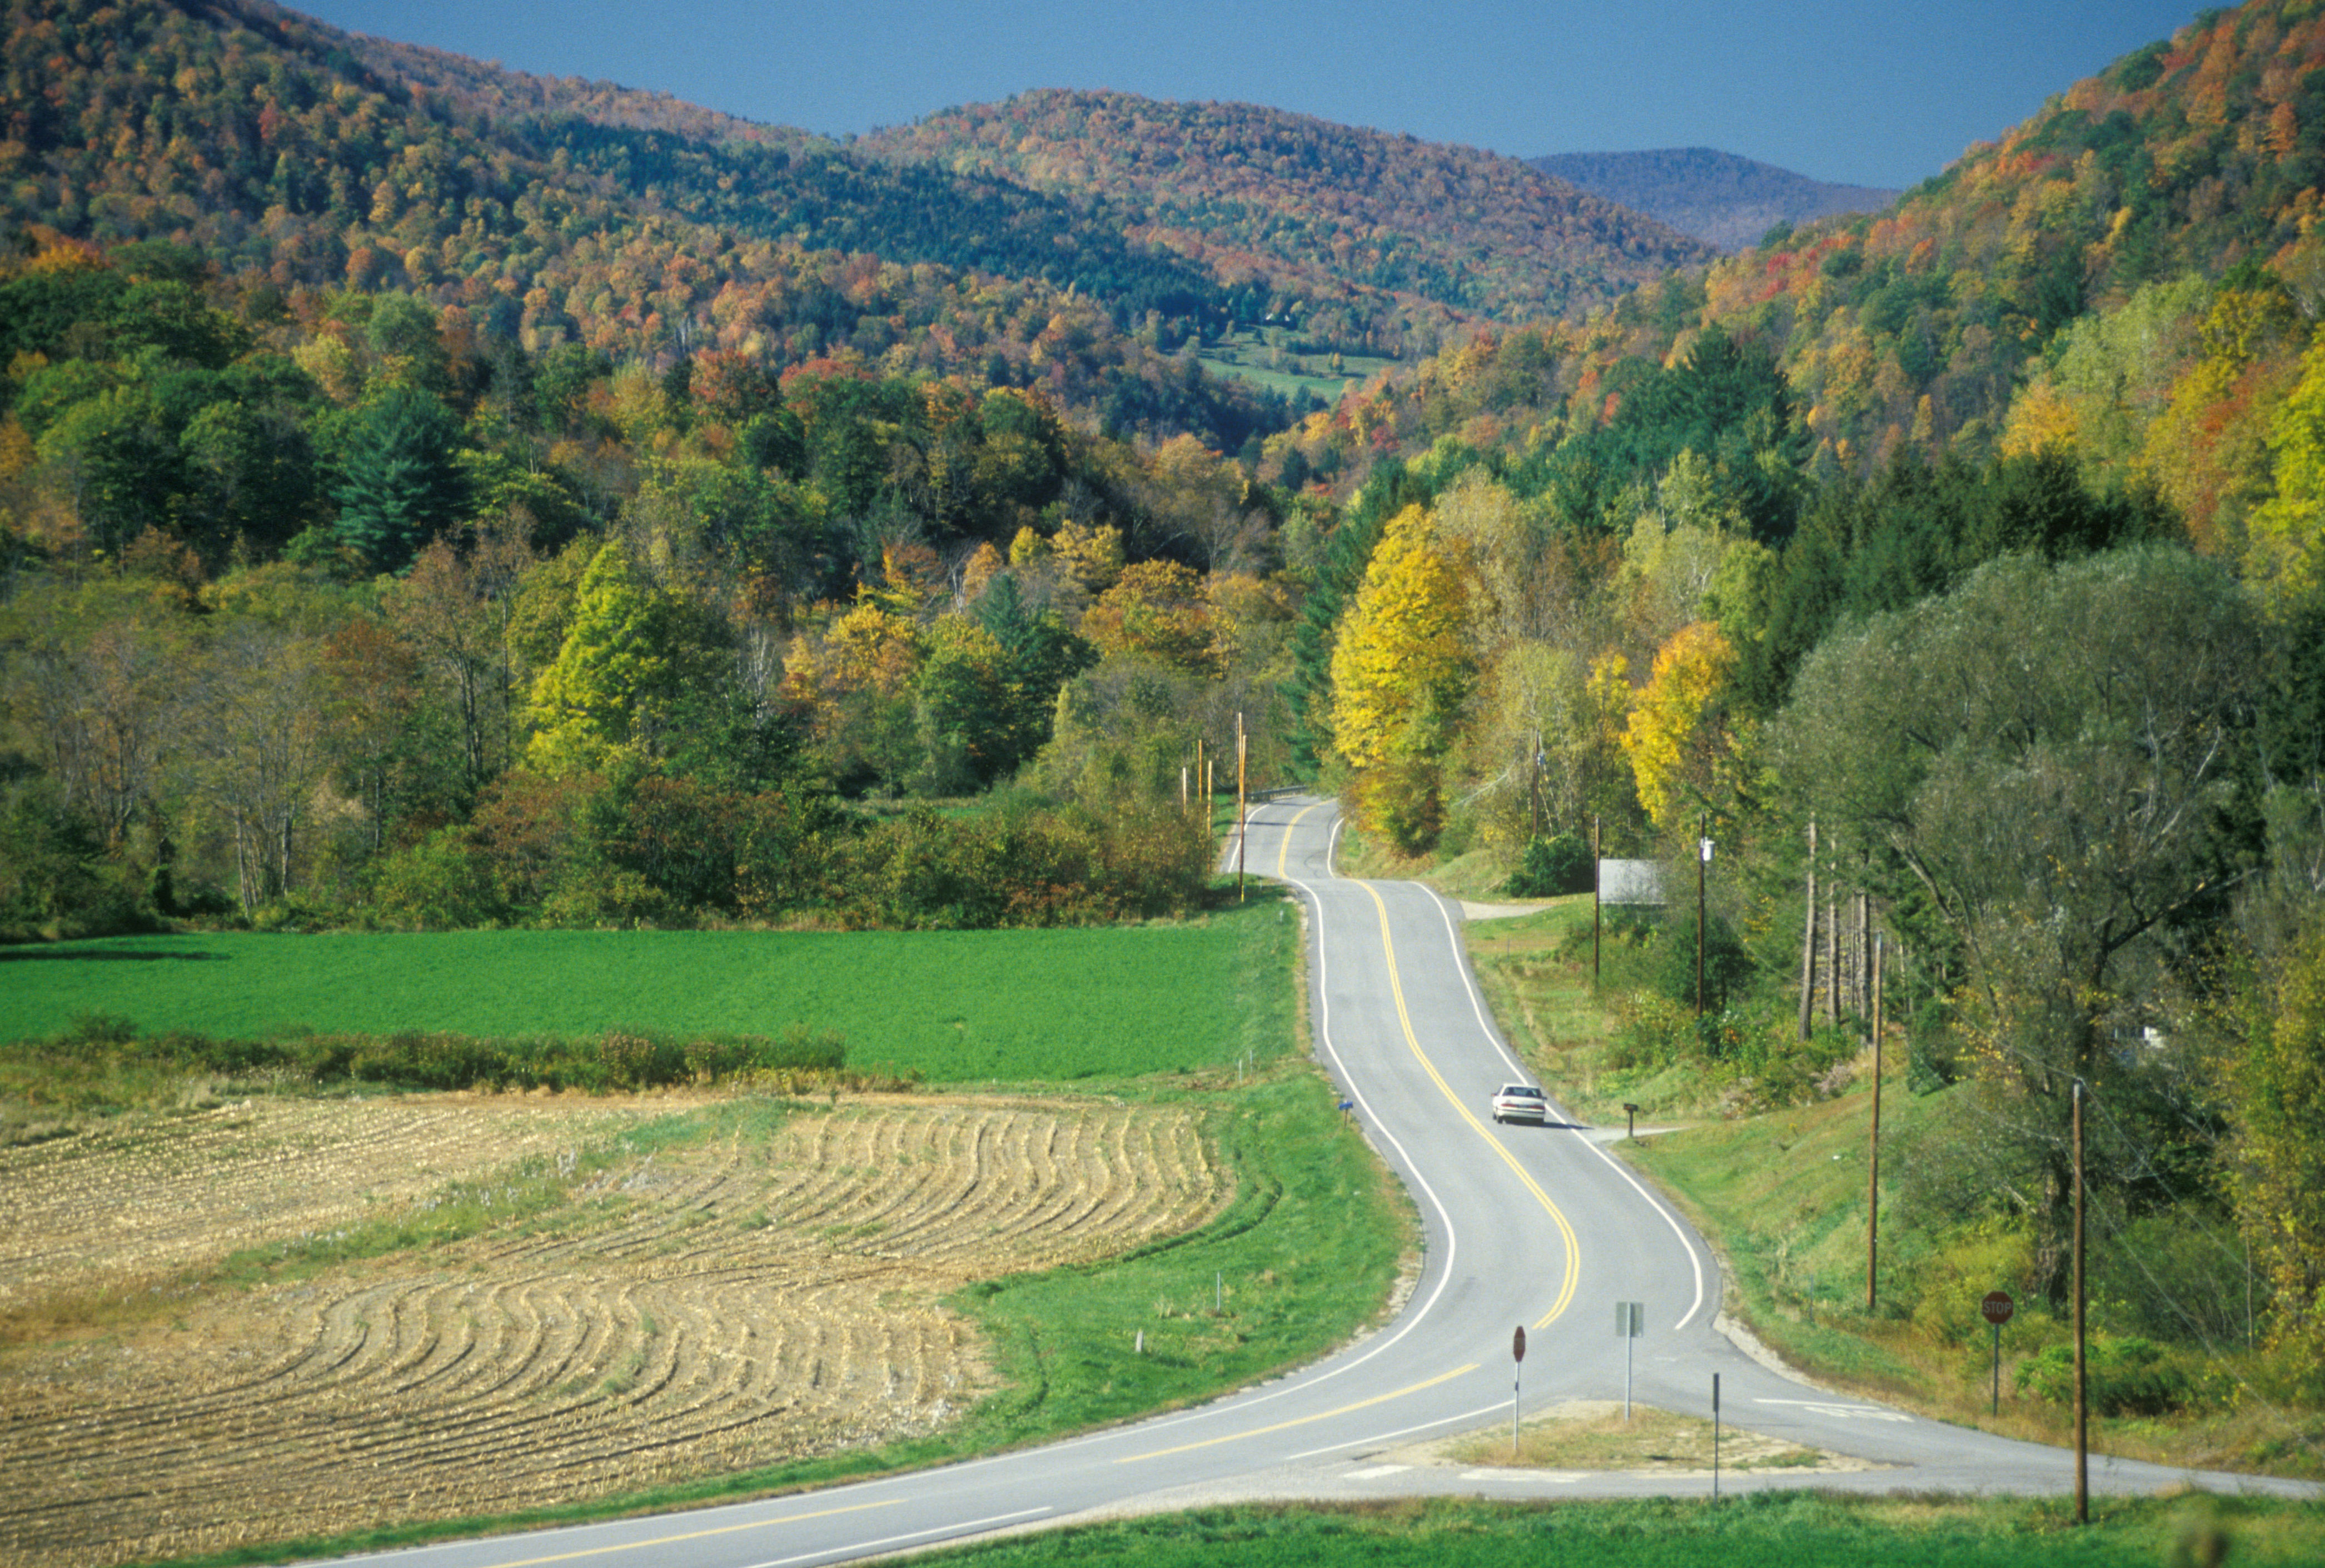 <p>It only takes around five hours to drive this 200 mile-road cutting through Vermont, but we suggest giving it five days to really enjoy the route, which takes in vast swathes of classic New England landscape. Its peak, of course, <a href="https://www.cntraveler.com/gallery/vermont-fall-foliage?mbid=synd_msn_rss&utm_source=msn&utm_medium=syndication">is during fall</a>, but this road is gorgeous in spring and summer, too. Veer past country stores and farm stands and stop by towns like Wilmington, Ludlow, Killington, Warren, and Stowe.</p> <p><strong>Where to stop:</strong> <a href="https://www.stowerec.org/parks-facilities/rec-paths/stowe-recreation-path/">Stowe Recreation Path</a> is ideal for biking, hikes, and idle picnics. In Weston, give yourself a little time to browse around the <a href="https://www.vermontcountrystore.com/">Vermont Country Store</a> (est. 1945) and pick up one of the retro ceramic Christmas trees, which the Orton family has begun reproducing using classic molds.</p> <p><strong>Where to eat:</strong> Locals’ favorite <a href="https://www.themadtaco.com/">Mad Taco</a> has four locations in the region—all the meats are smoked in-house and the hot sauces are made from scratch. The family-run Fat Toad Farm in Brookfield is worth a pitstop for its goat cheese with caramel sauce, which is also made from milk produced by the family’s herds. Buy some to take home, and expect to be eating it direct from the jar when no one’s looking.</p> <p><strong>Where to stay:</strong> In Warren, check in to the <a href="https://www.pitcherinn.com/">Pitcher Inn</a>, a stately house kitted out in preppy New England decor (think duck decoys, paneled walls). After a country breakfast, take out a complimentary canoe on the trout-filled stream or play a game of shuffleboard.</p><p>Sign up to receive the latest news, expert tips, and inspiration on all things travel</p><a href="https://www.cntraveler.com/newsletter/the-daily?sourceCode=msnsend">Inspire Me</a>